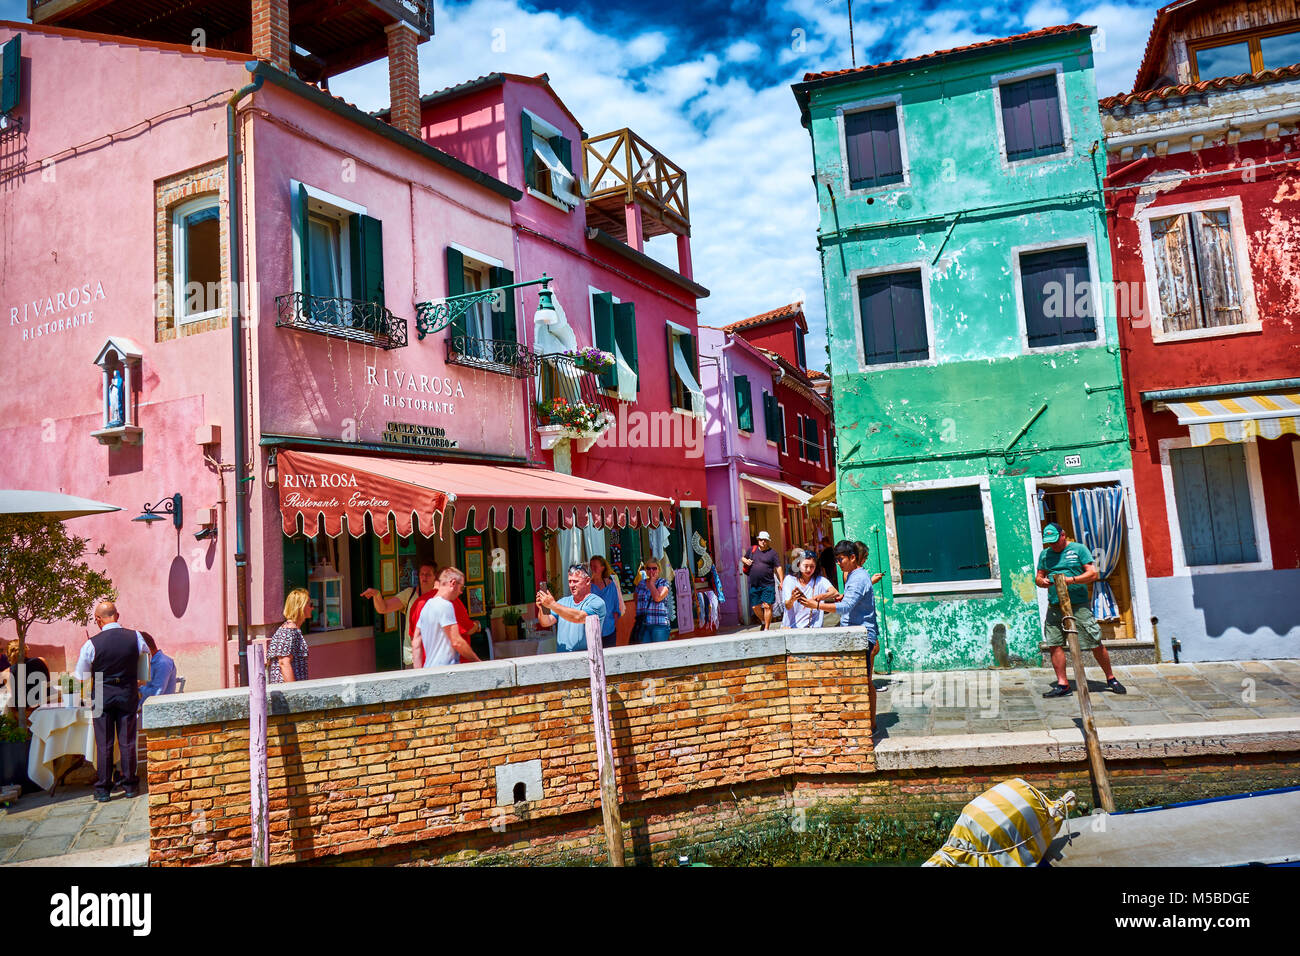 BURANO, ITALY - MAY 21, 2017: View of colorful buildings and stores on the streets surrounded by tourists in Burano. Stock Photo